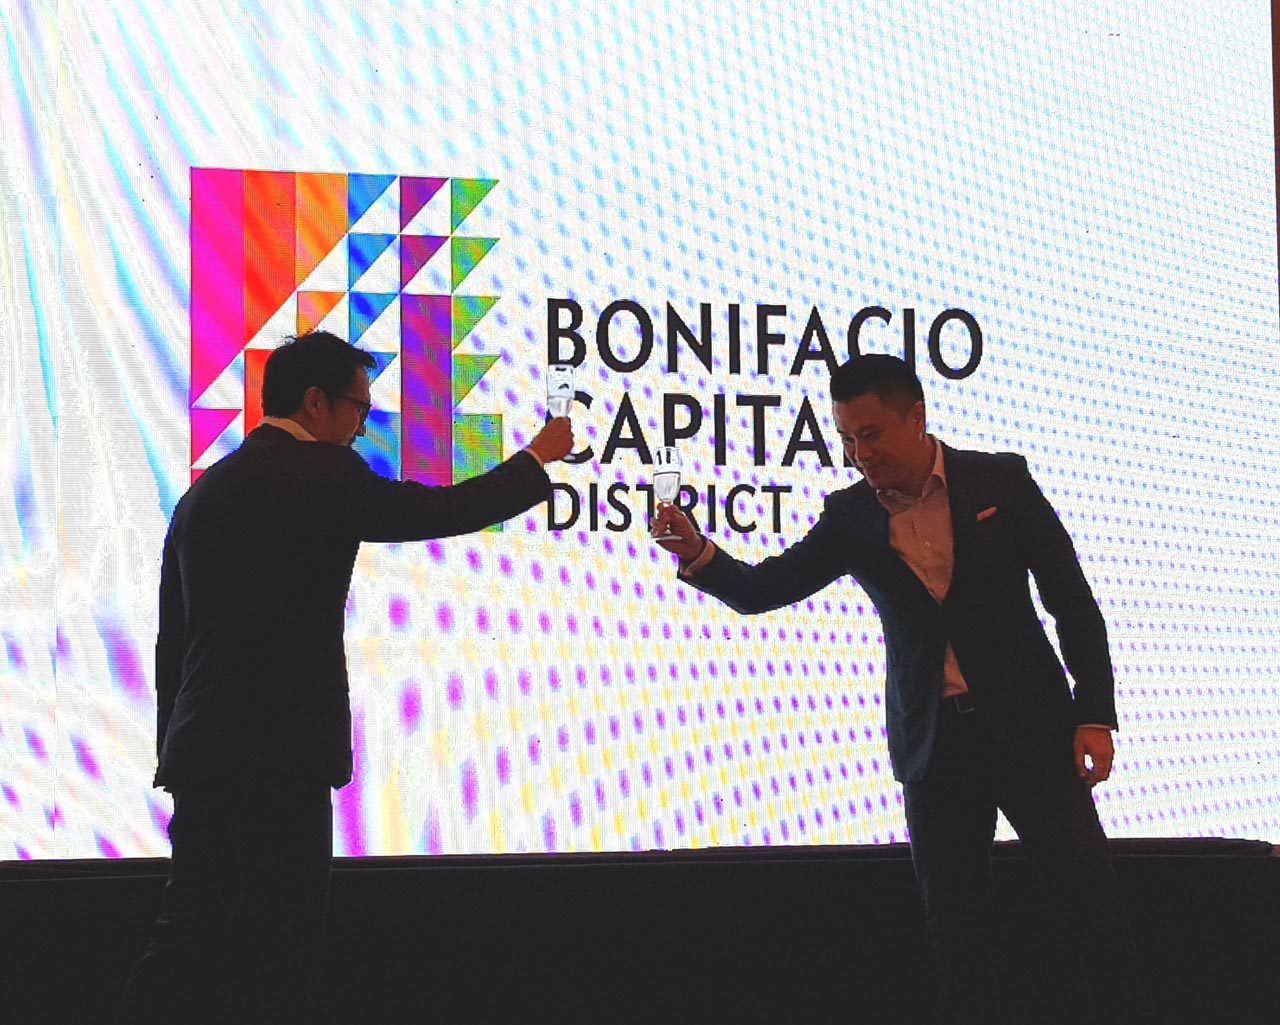 DEAL. BCDA president and CEO Vince Dizon and Megaworld executive vice president and chief strategy officer Kevin Tan sign an agreement to build the Bonifacio Capital District. Photo by Megaworld  